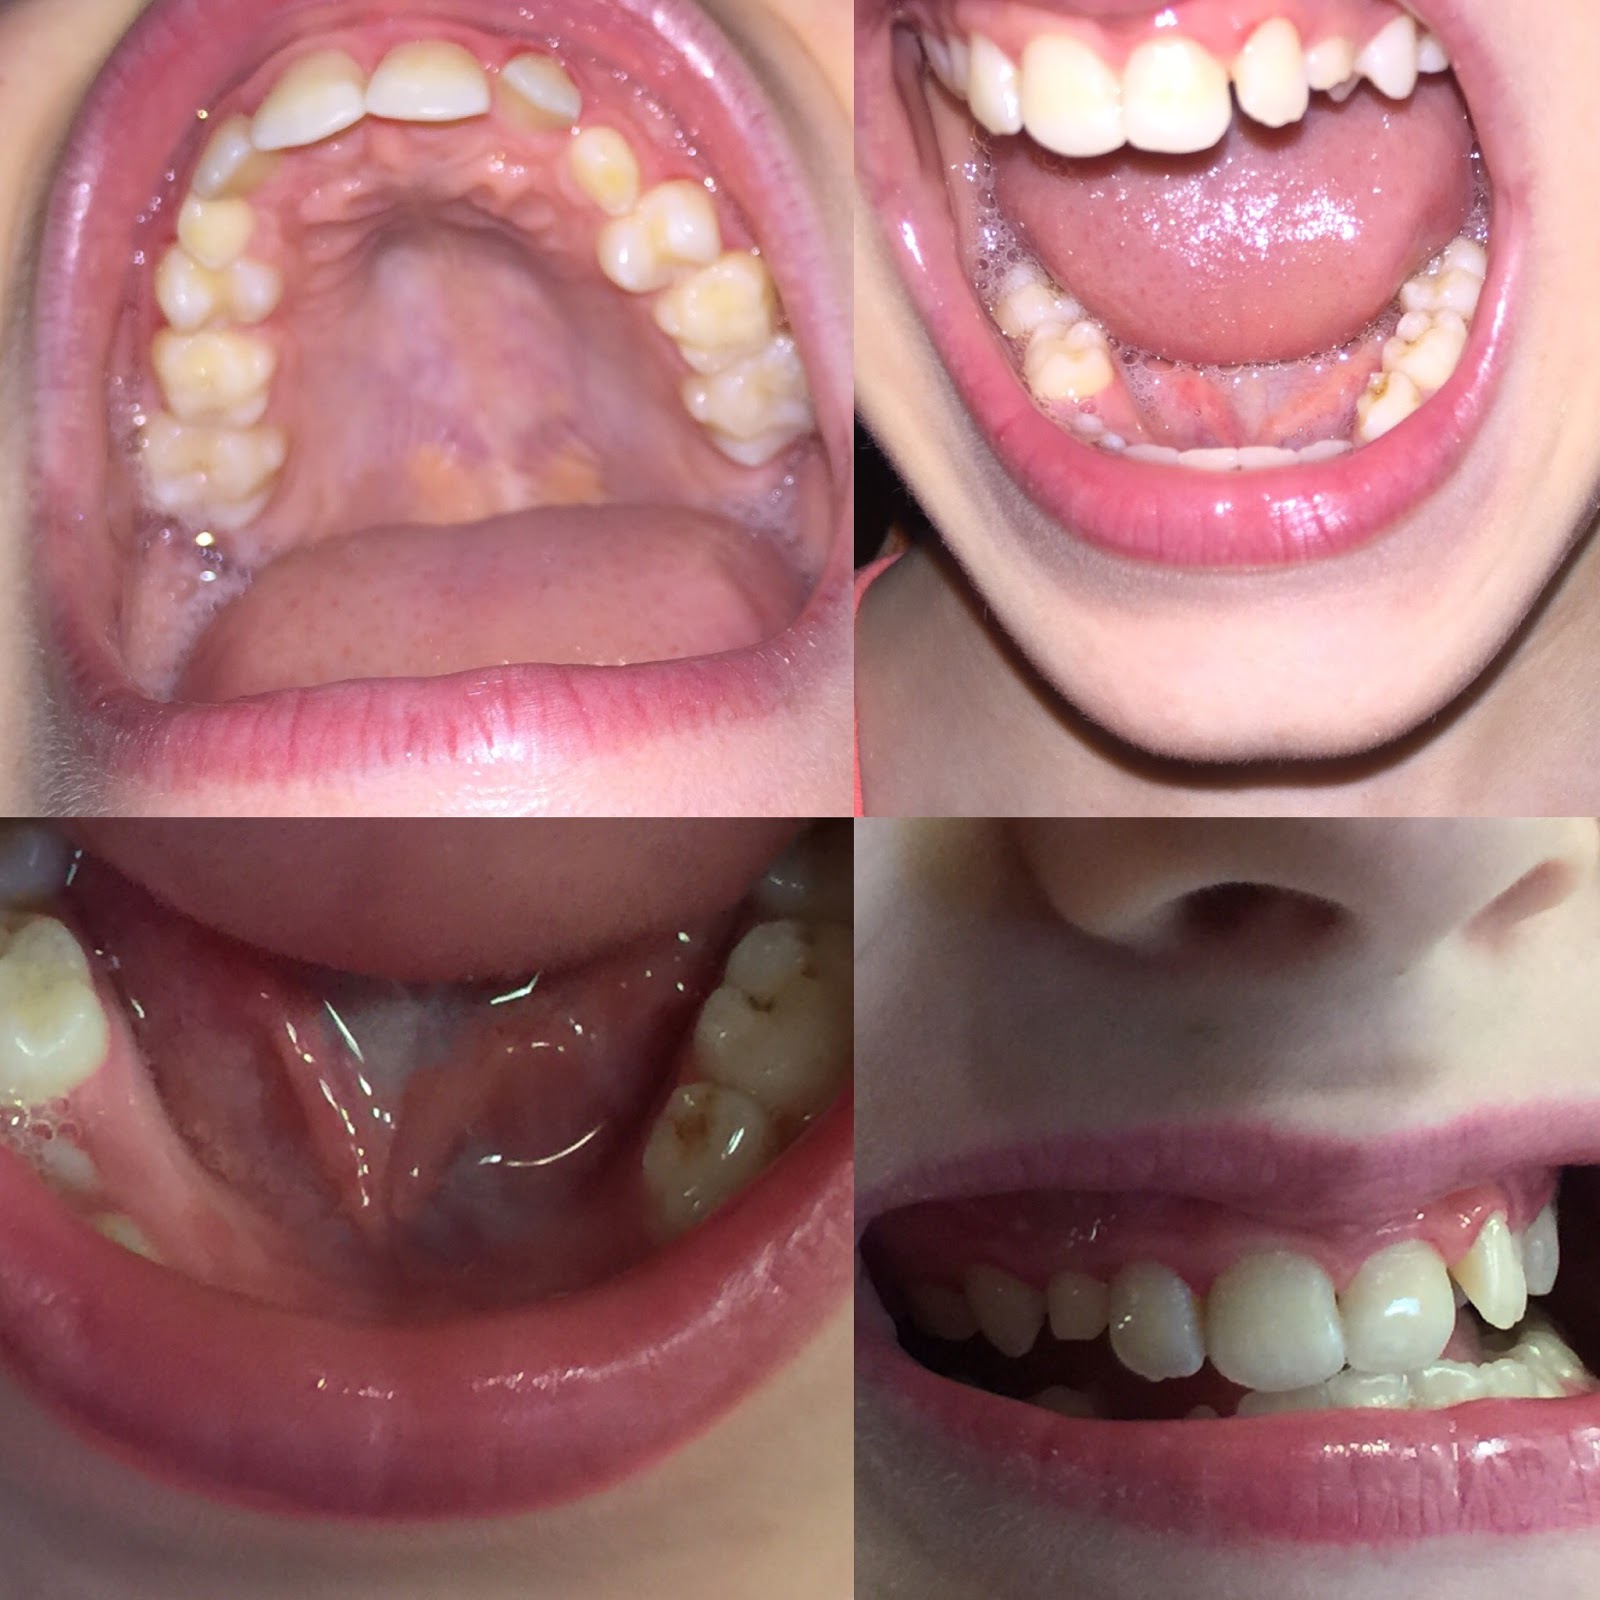 The REAL Deal 5 cavities HEALED in Autistic Child YES YOU CAN see 